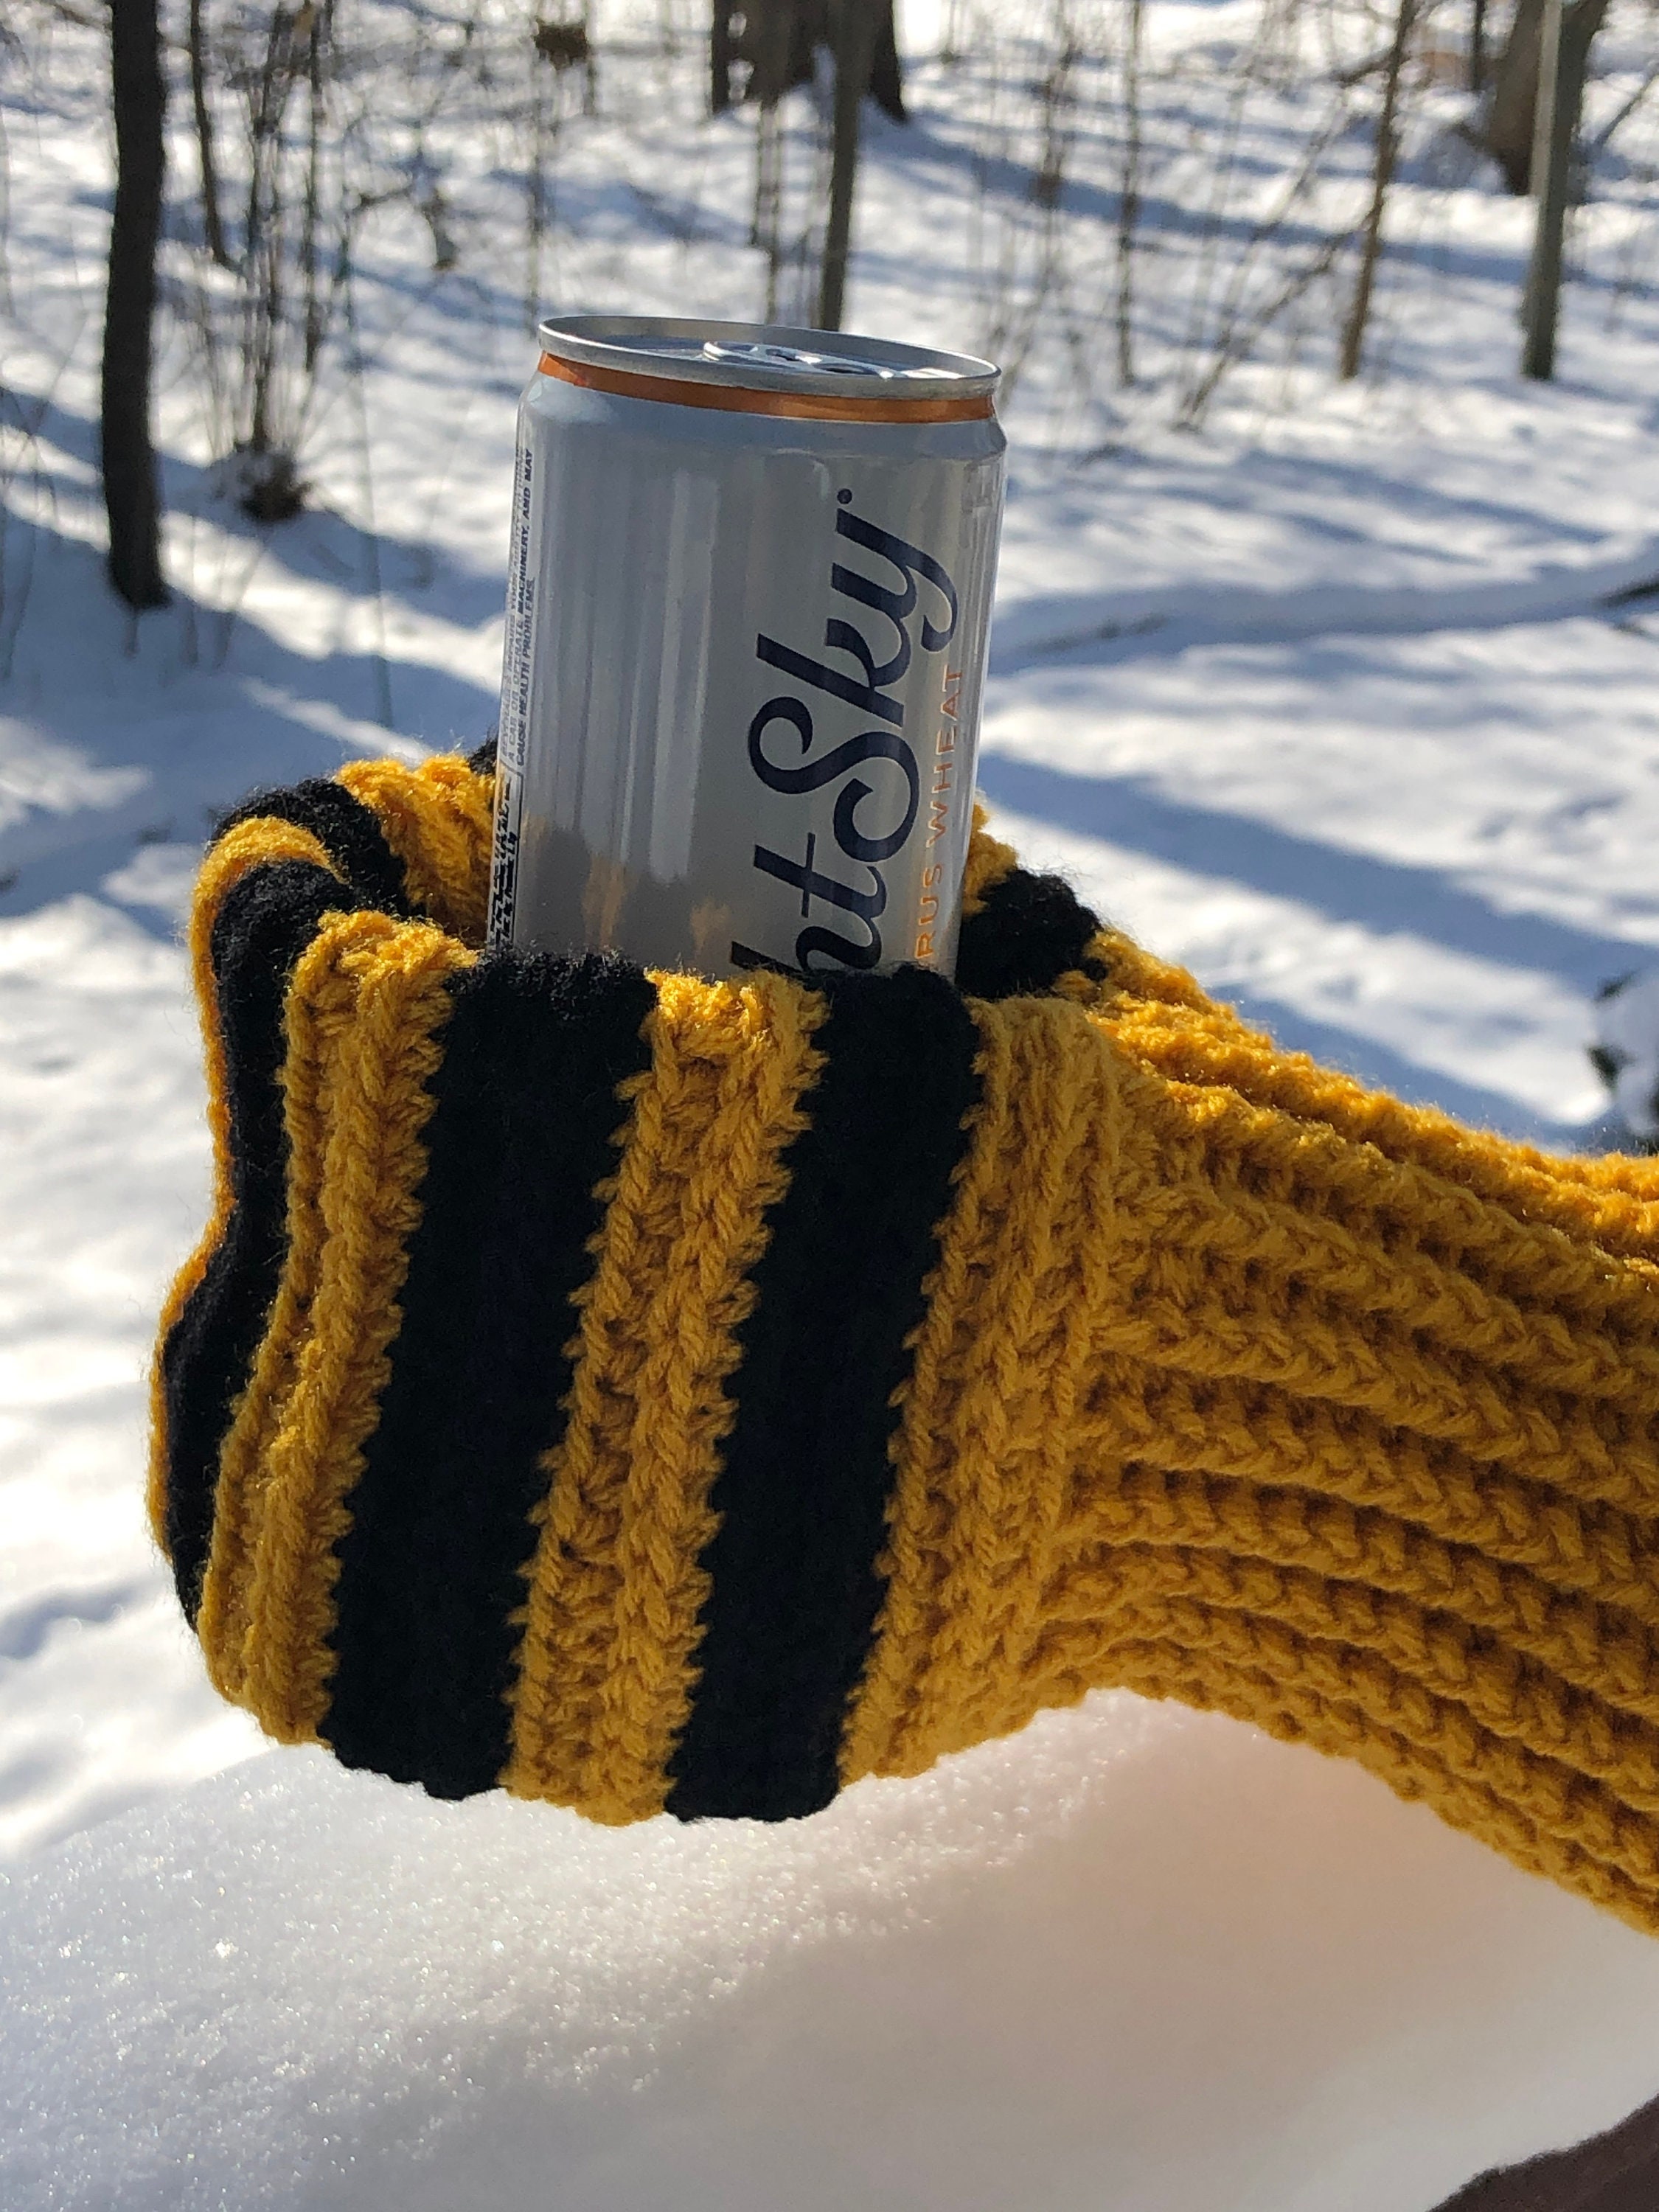 Drink Mitts. Cup Holder Mittens. Beer Mitts. Secret Santa Gifts